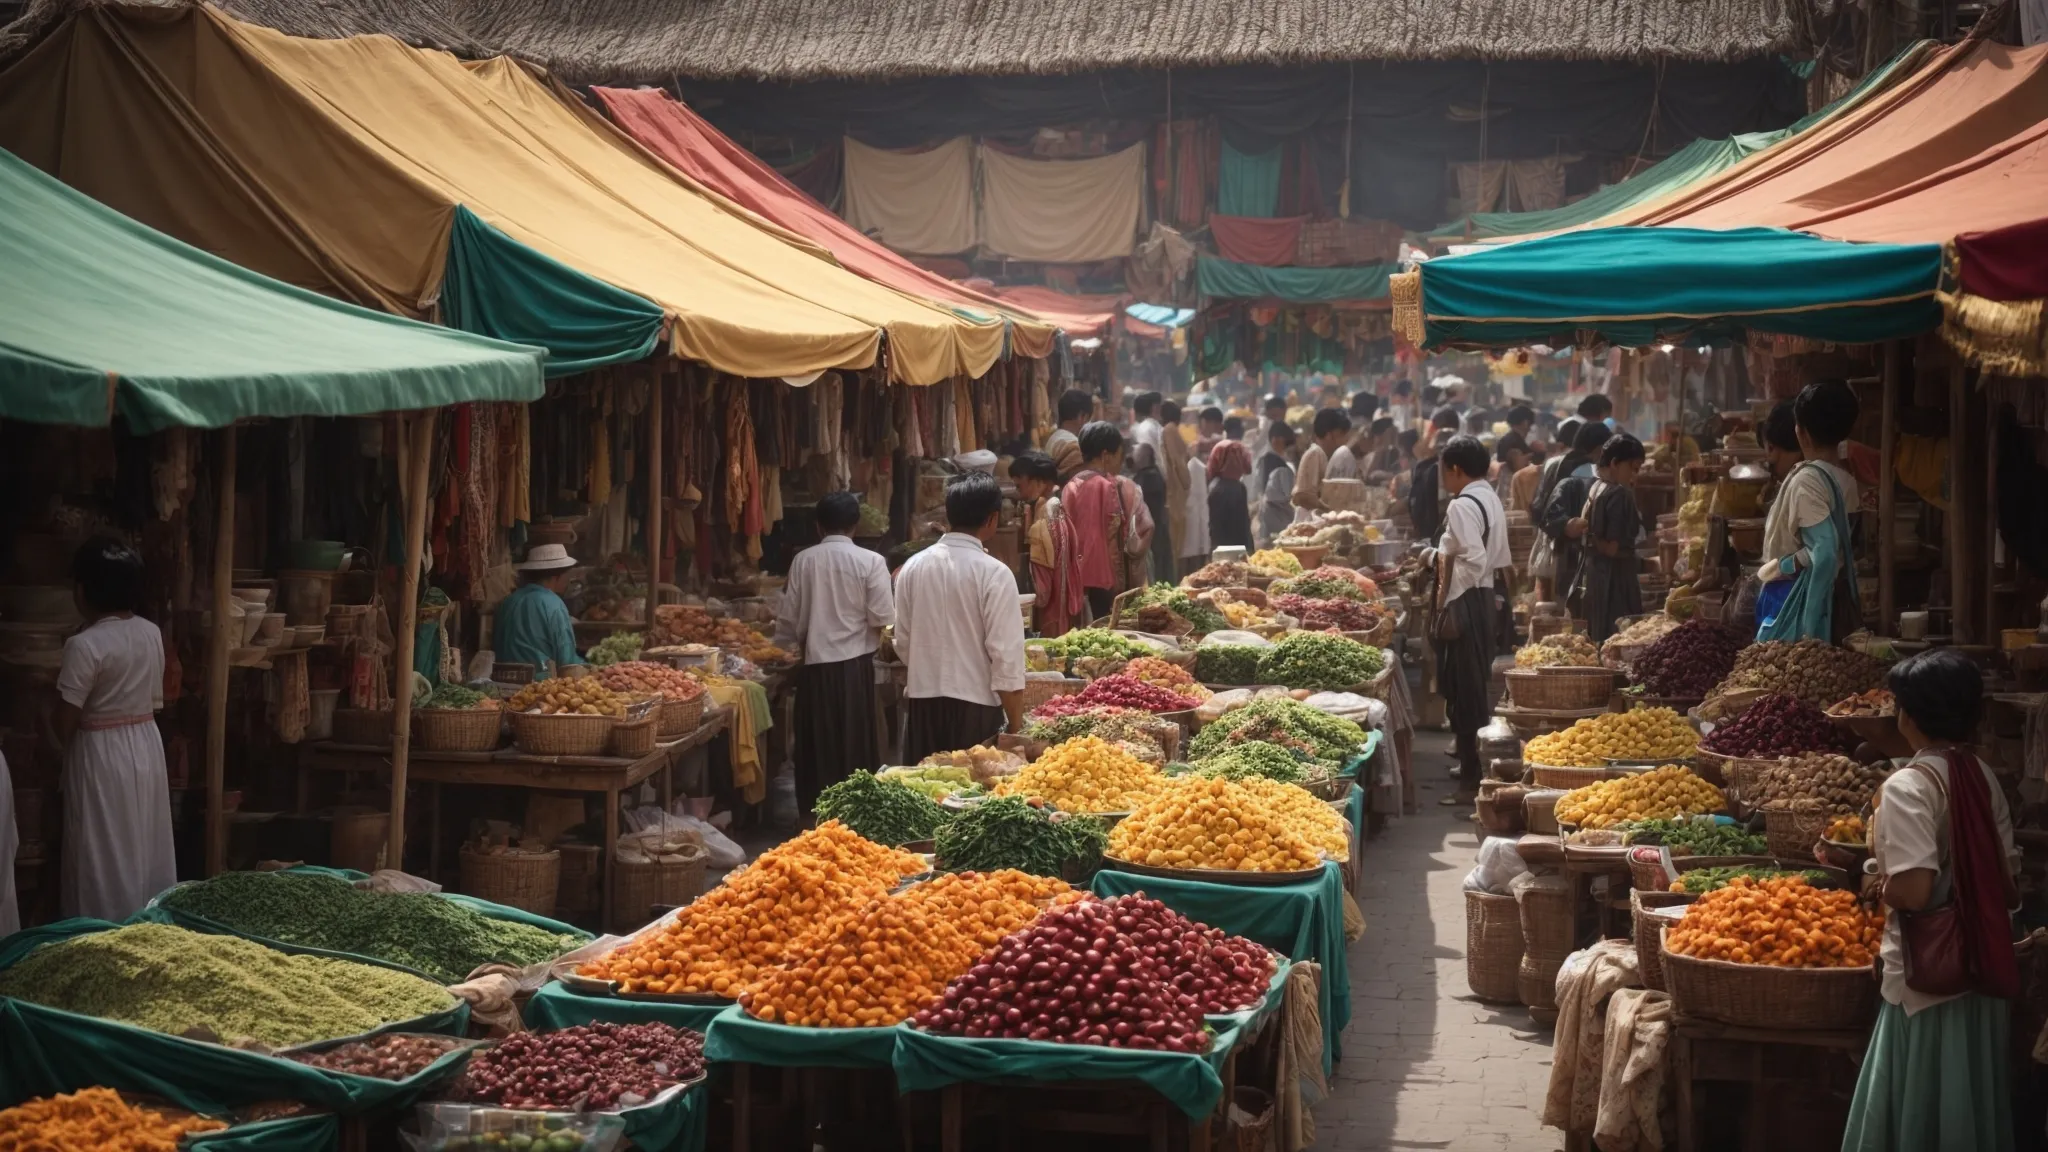 a bustling marketplace with colorful stalls displaying a variety of products and people engaging with vendors.